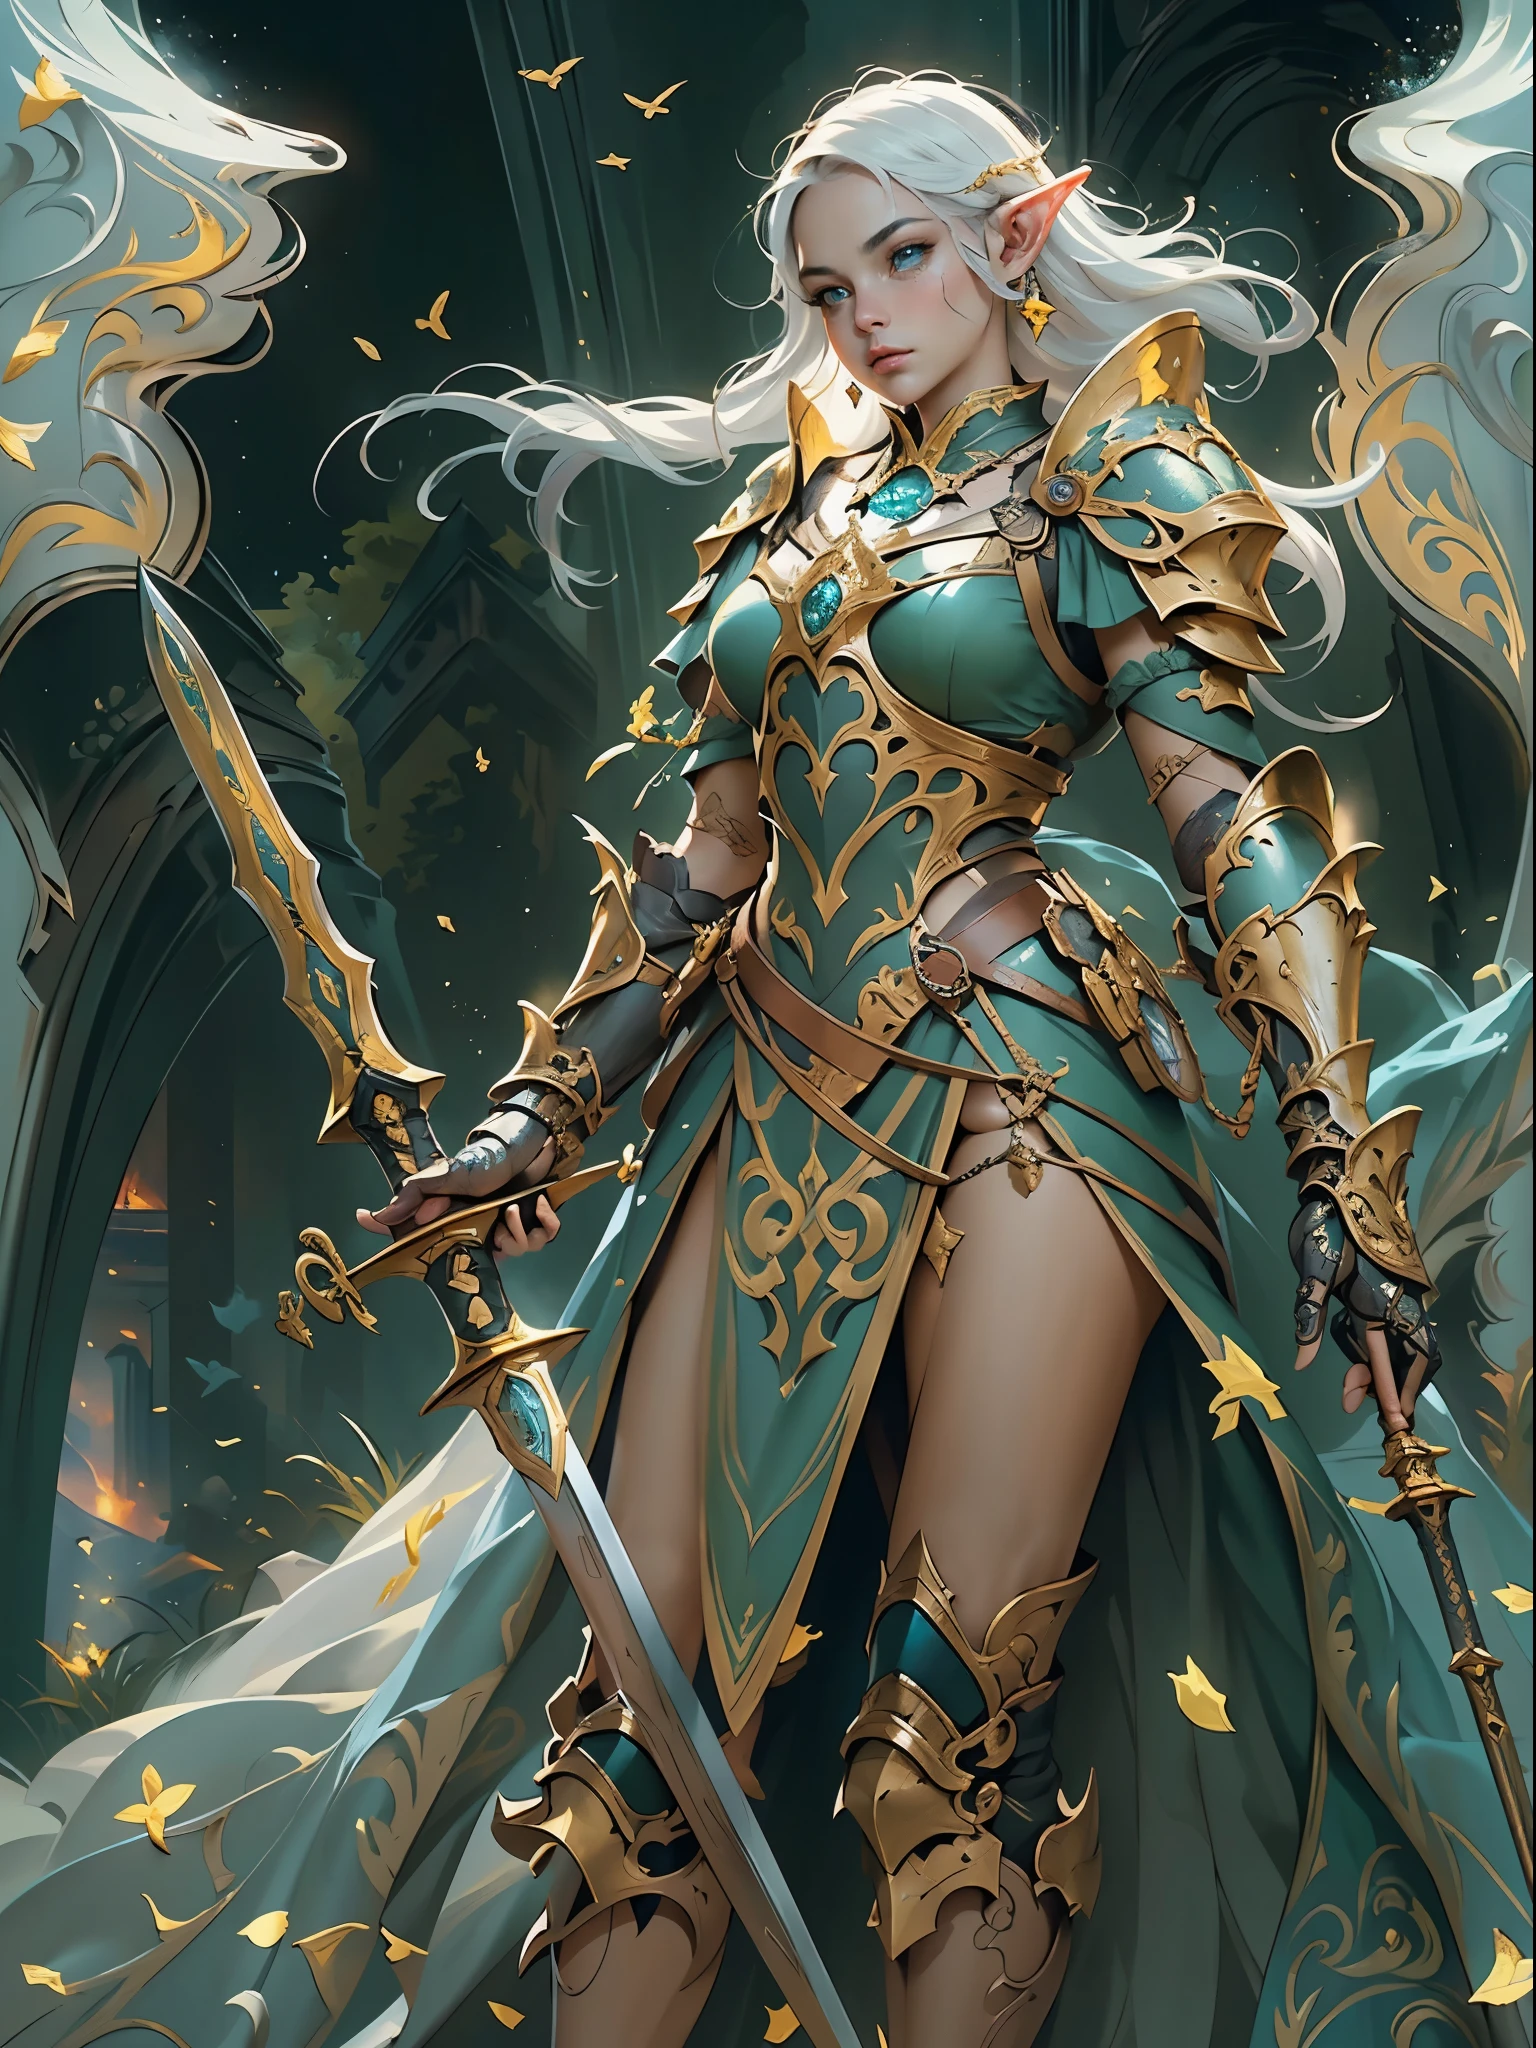 high details, best quality, 8k, [ultra detailed], masterpiece, best quality, (extremely detailed), full body, ultra wide shot, photorealistic, fantasy_world, fantasy art, dnd art, rpg art, realistic art, a wide angle, (((anatomically correct))) a wallpaler of an elf knight, elf warrior, princess knight, shinning knight, ready for battle with her mount (intense details, Masterpiece, best quality: 1.5), female elf (intense details, Masterpiece, best quality: 1.5), ultra detailed face, ultra feminine, fair skin, exquisite beauty, gold hair, long hair, wavy hair, small pointed ears, dynamic eyes color, wearing heavy mech armor, shinning metal, armed with elven sword fantasysword sword, standing near her mount, dynamic mount , green meadows, blue skies background and some clouds background depth of field (intricate details, Masterpiece, best quality: 1.5), full body (intricate details, Masterpiece, best quality: 1.5), high details, best quality, highres, ultra wide angle